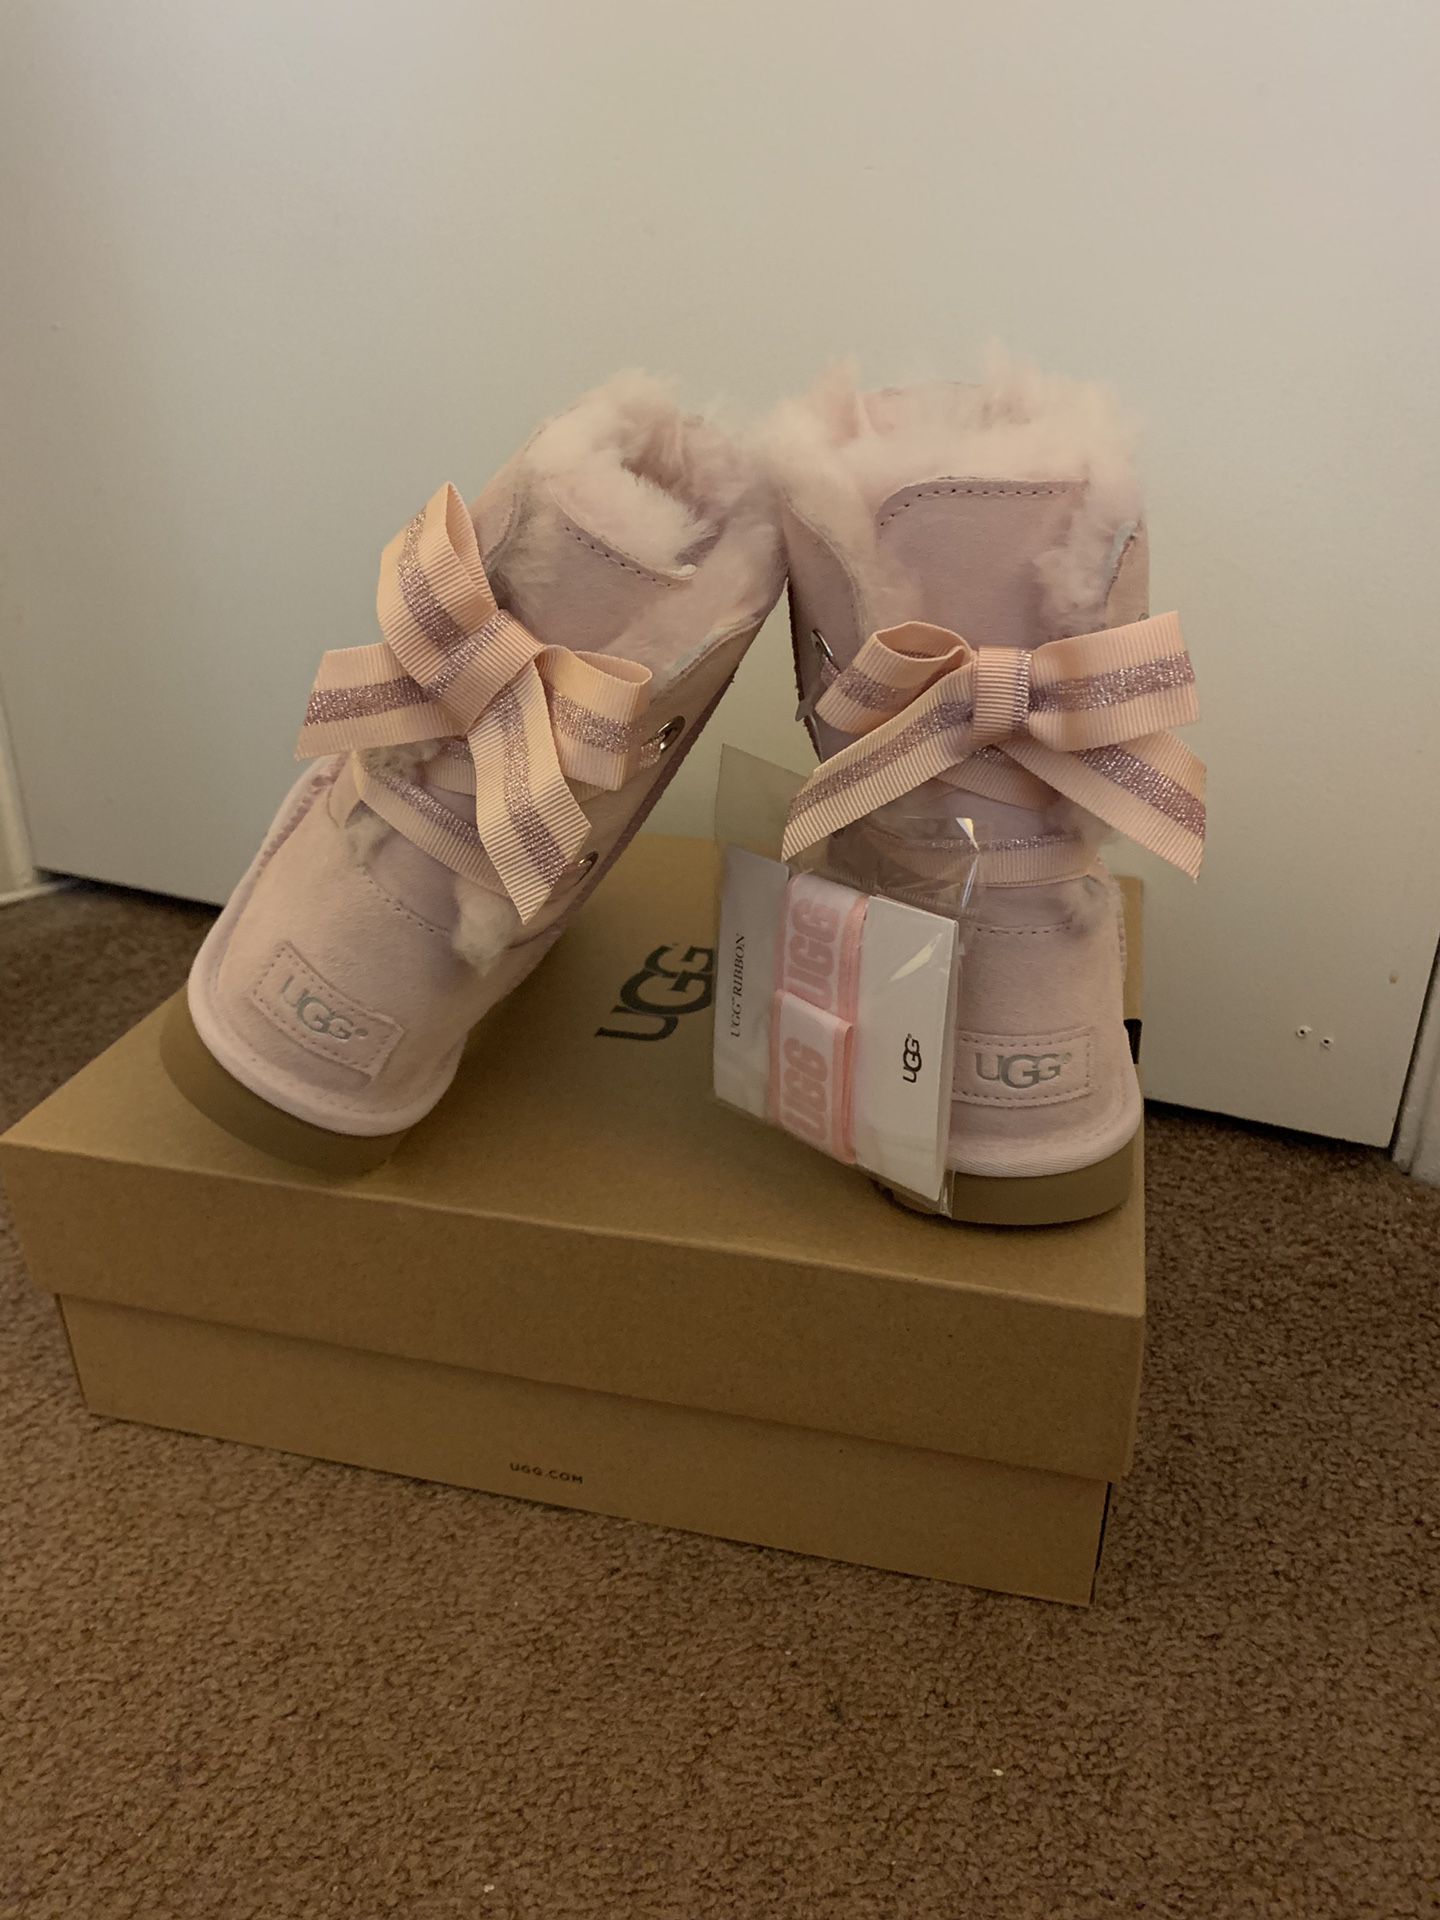 100% Authentic Brand New in Box UGG Light Pink Customizable Bailey Bow Boots / Women size 6 (big kids 4)